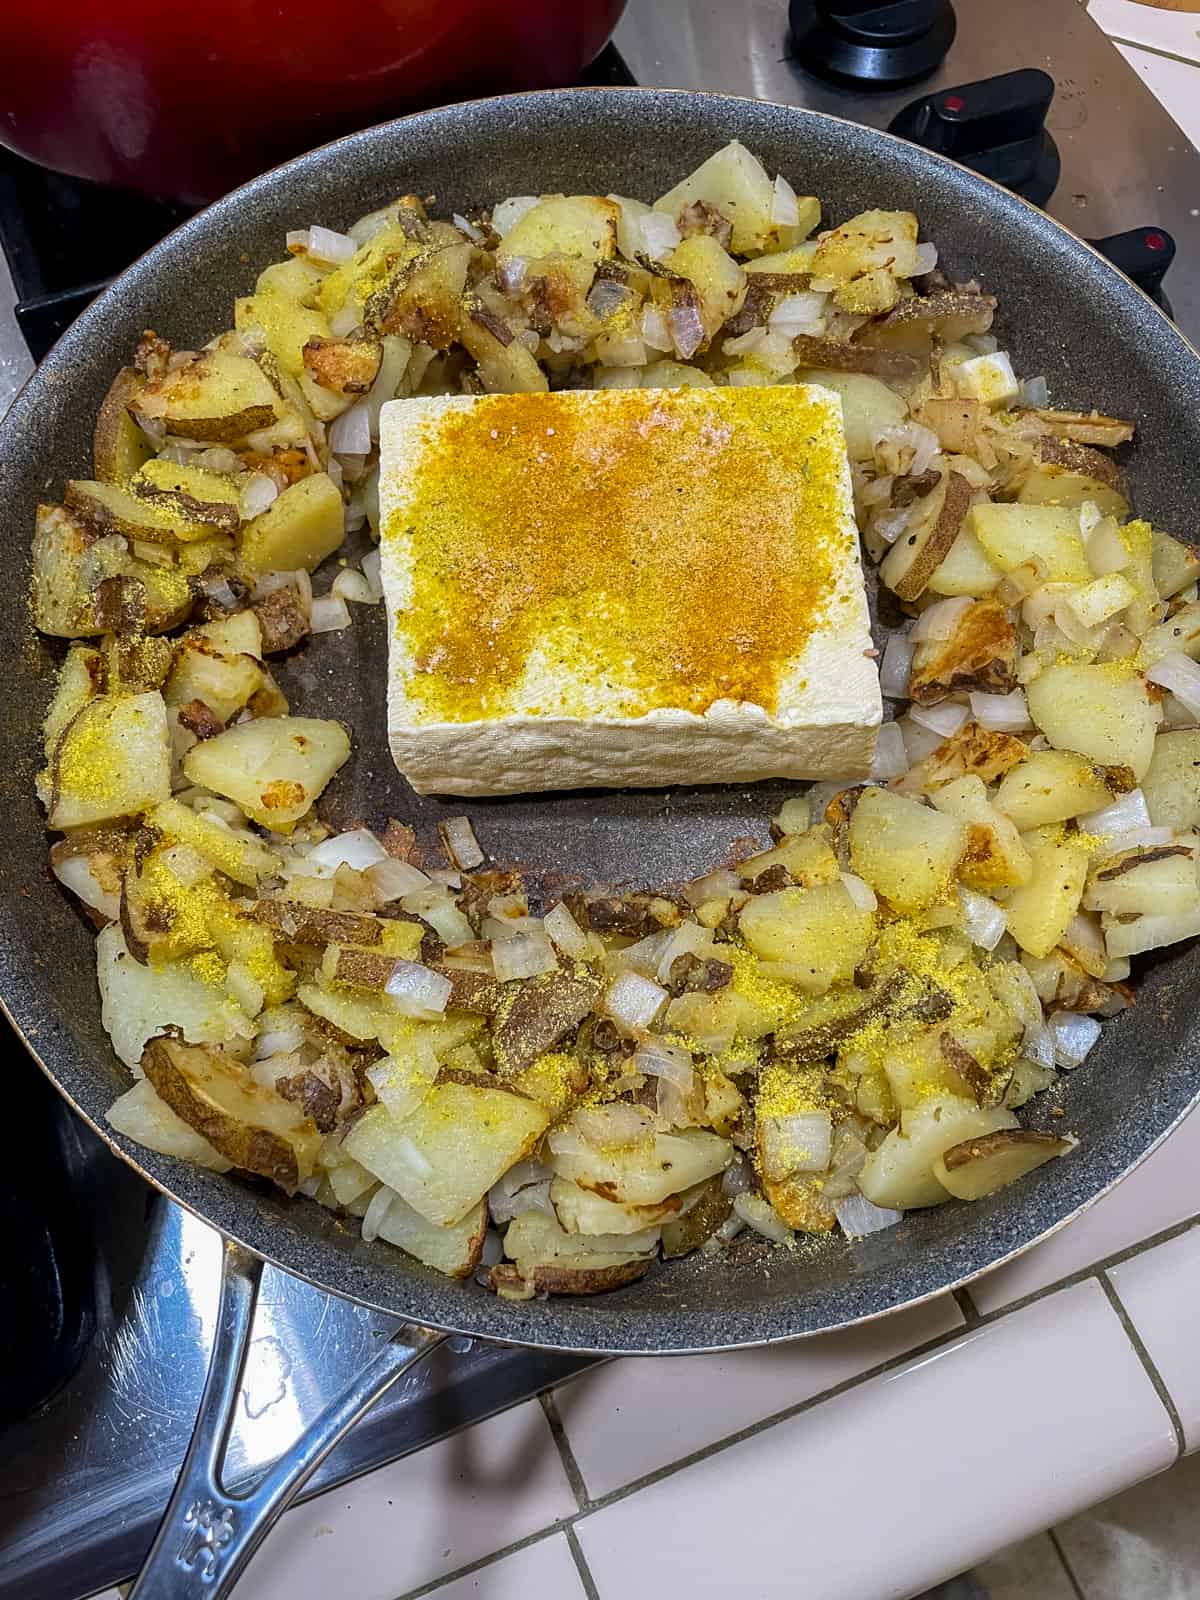 Added spices to tofu and potatoes